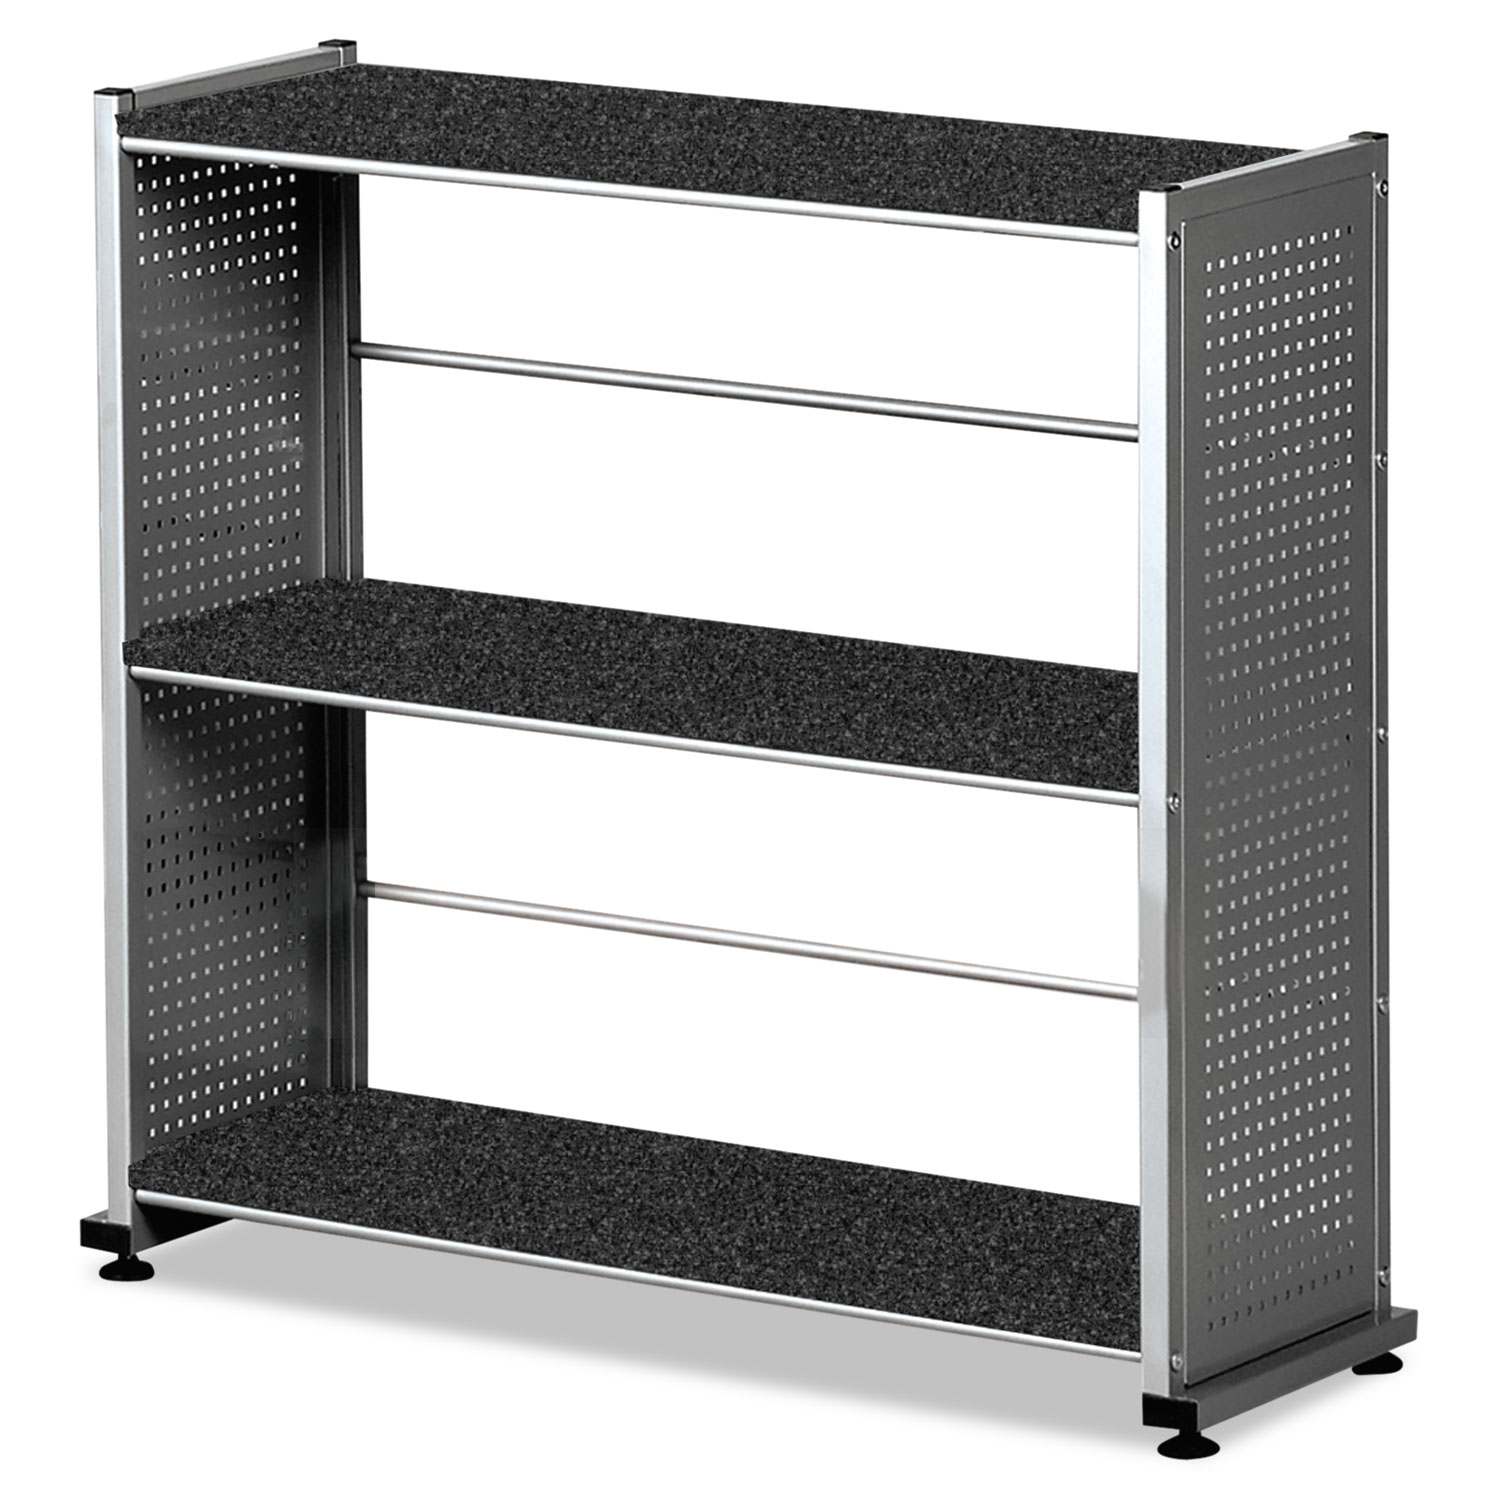 Eastwinds Accent Shelving, Three-Shelf, 31-1/4w x 11d x 31h, Anthracite